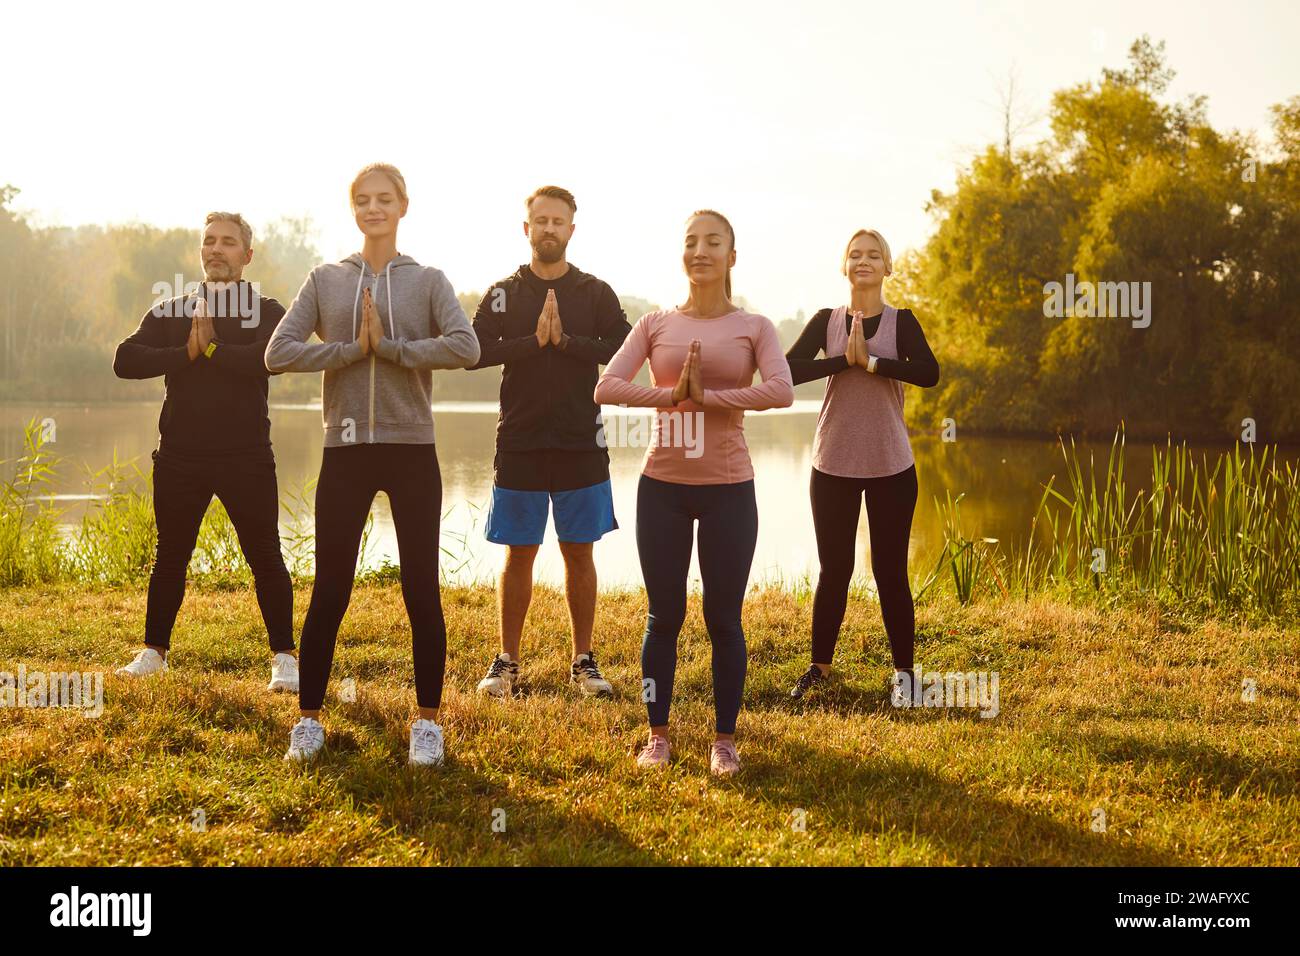 Group of fit and active people doing yoga exercises in nature. Outdoors fitness concept. Stock Photo